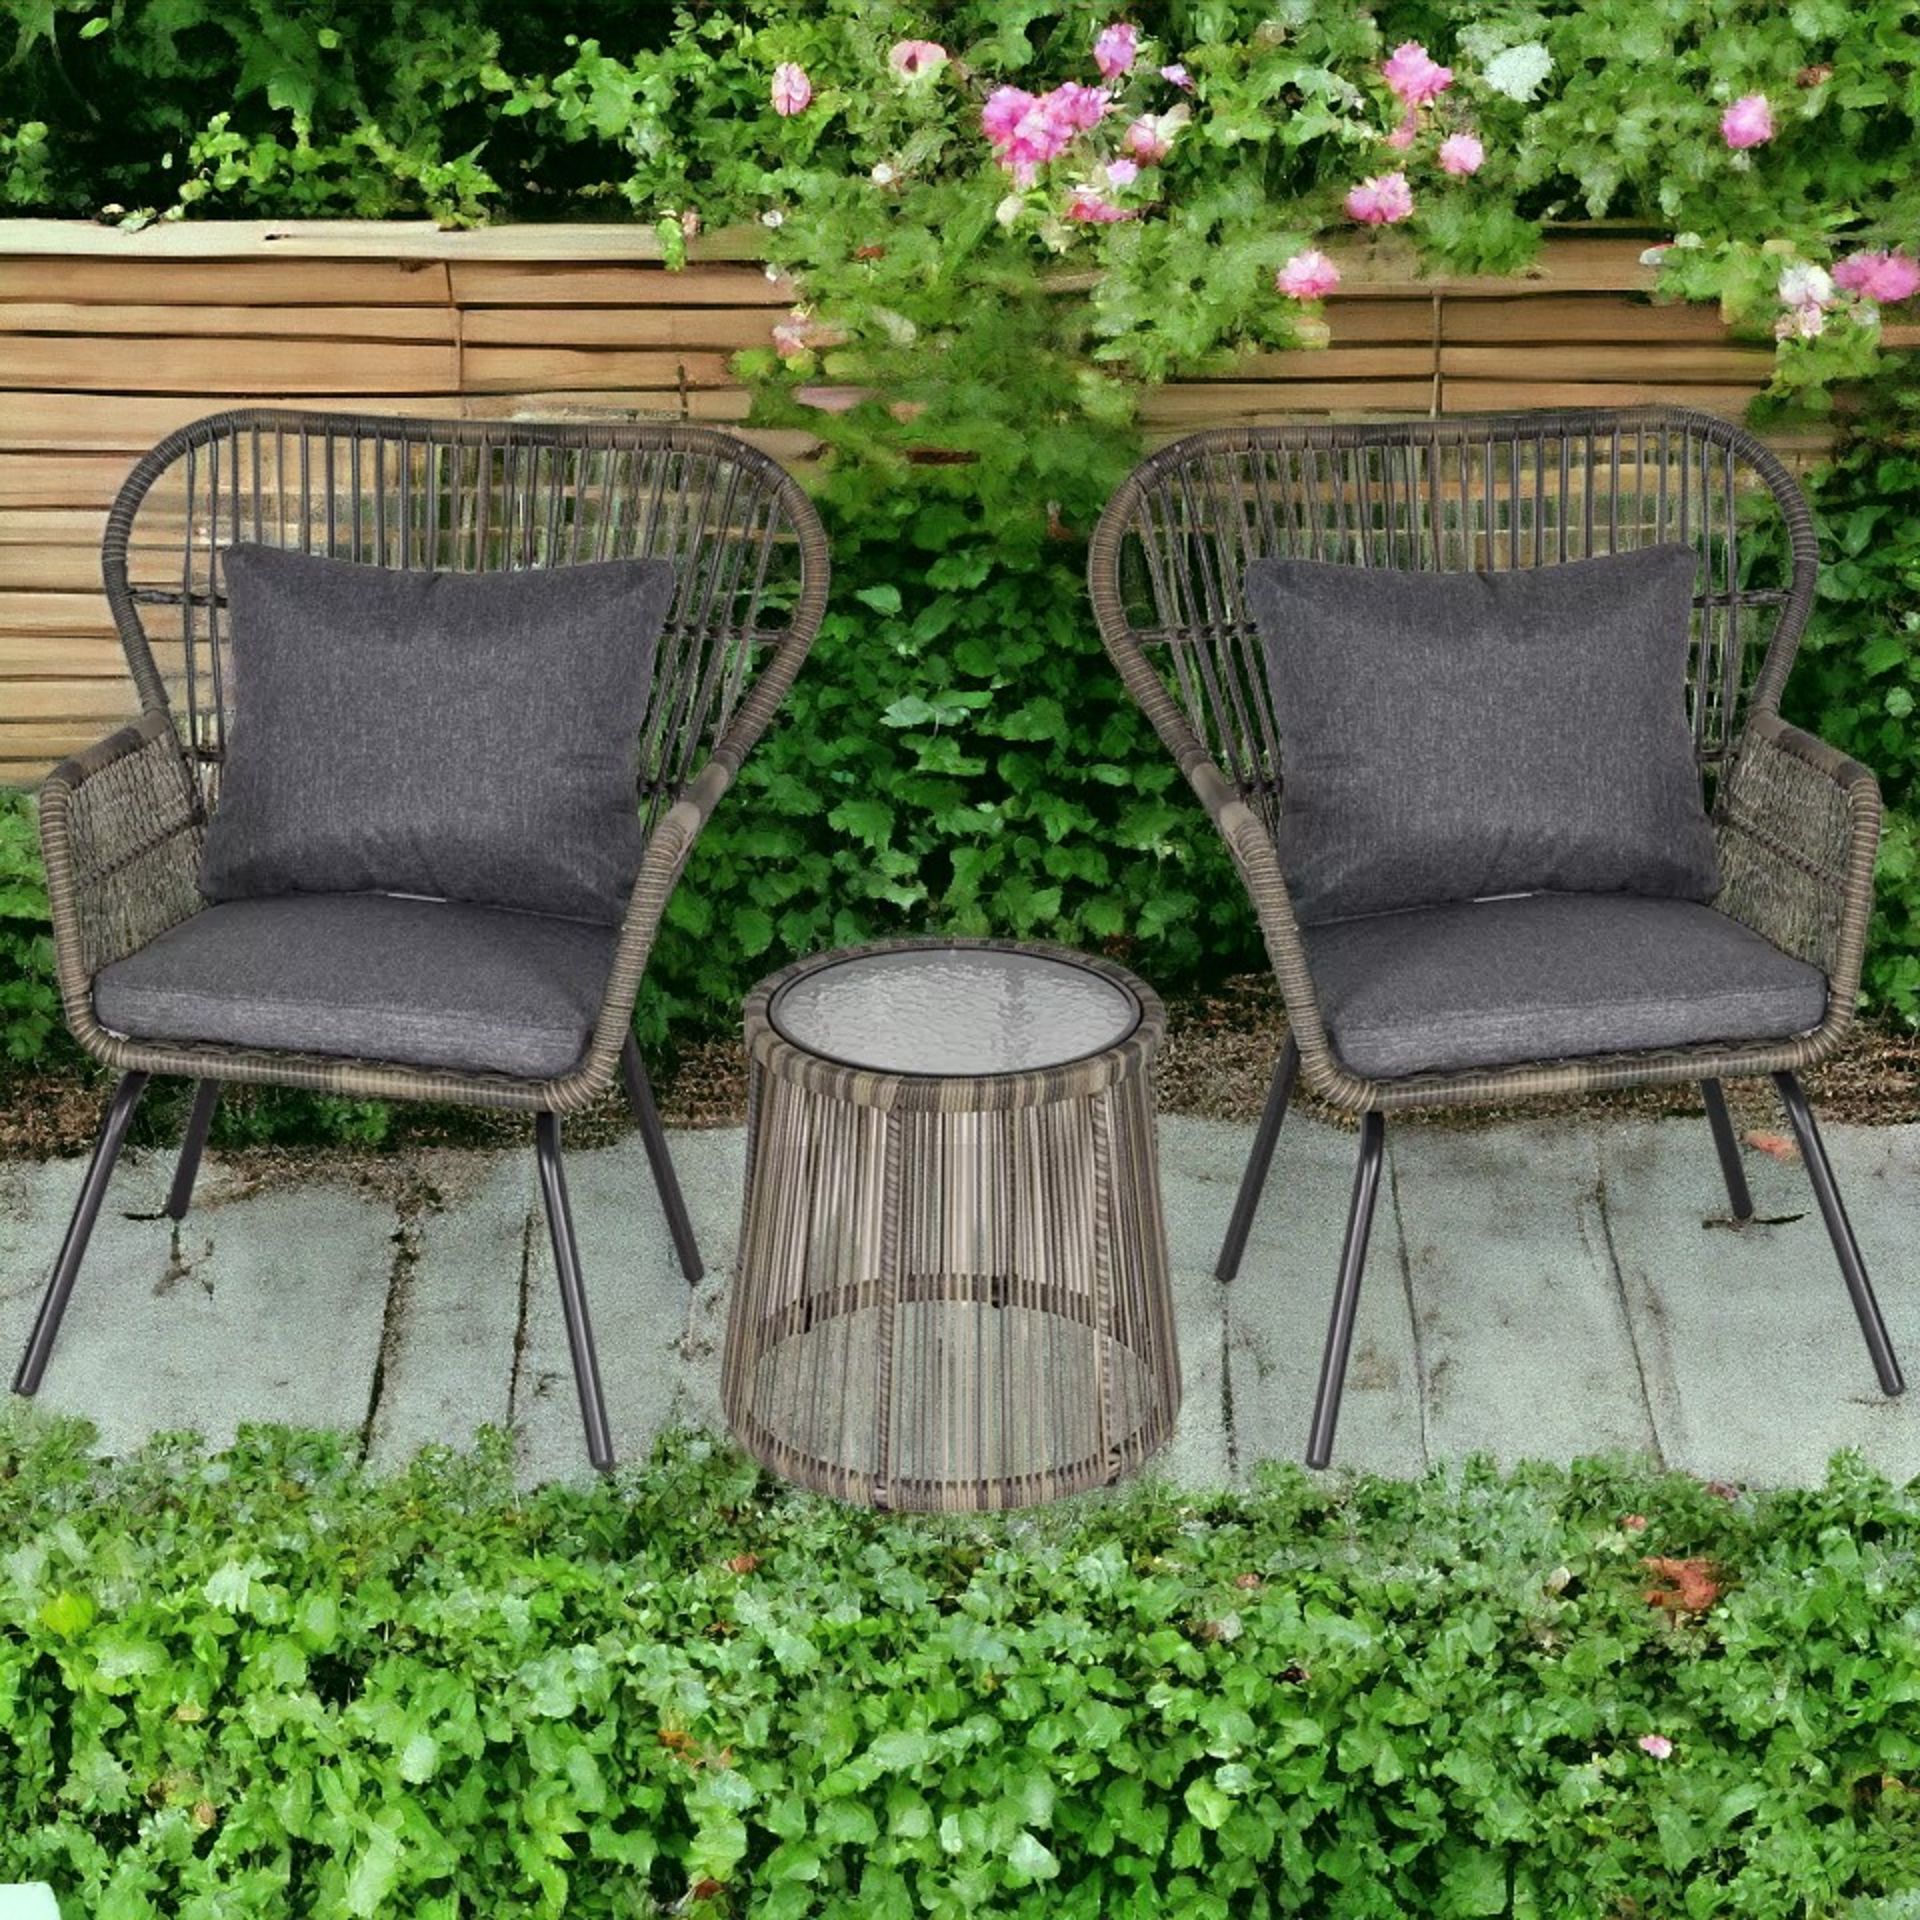 FREE DELIVERY - BRAND NEW 3 PCS WEBBED PE RATTAN OUTDOOR PATIO SET W/ CUSHIONS STEEL FRAME GREY - Image 2 of 2